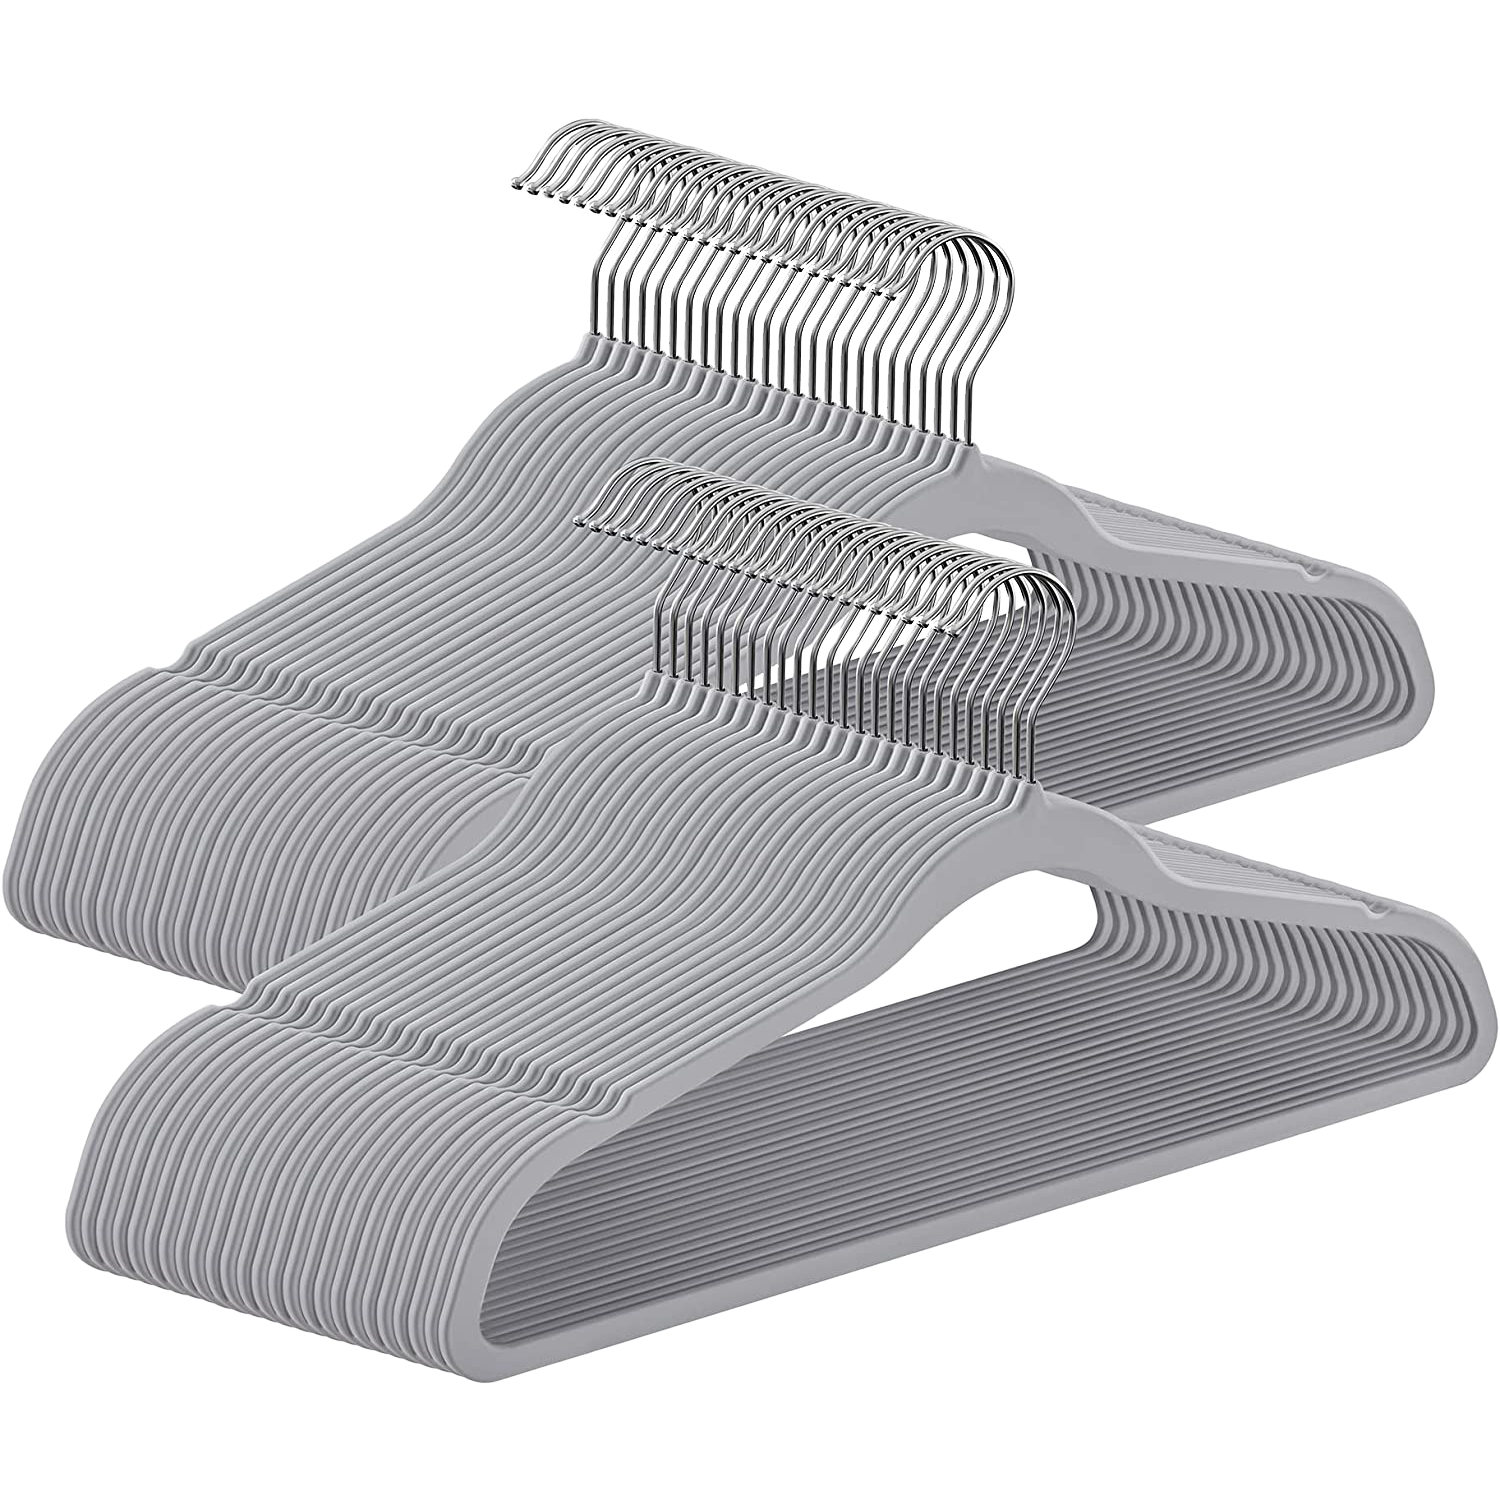 Set of 50 gray rubber hangers from Amazon